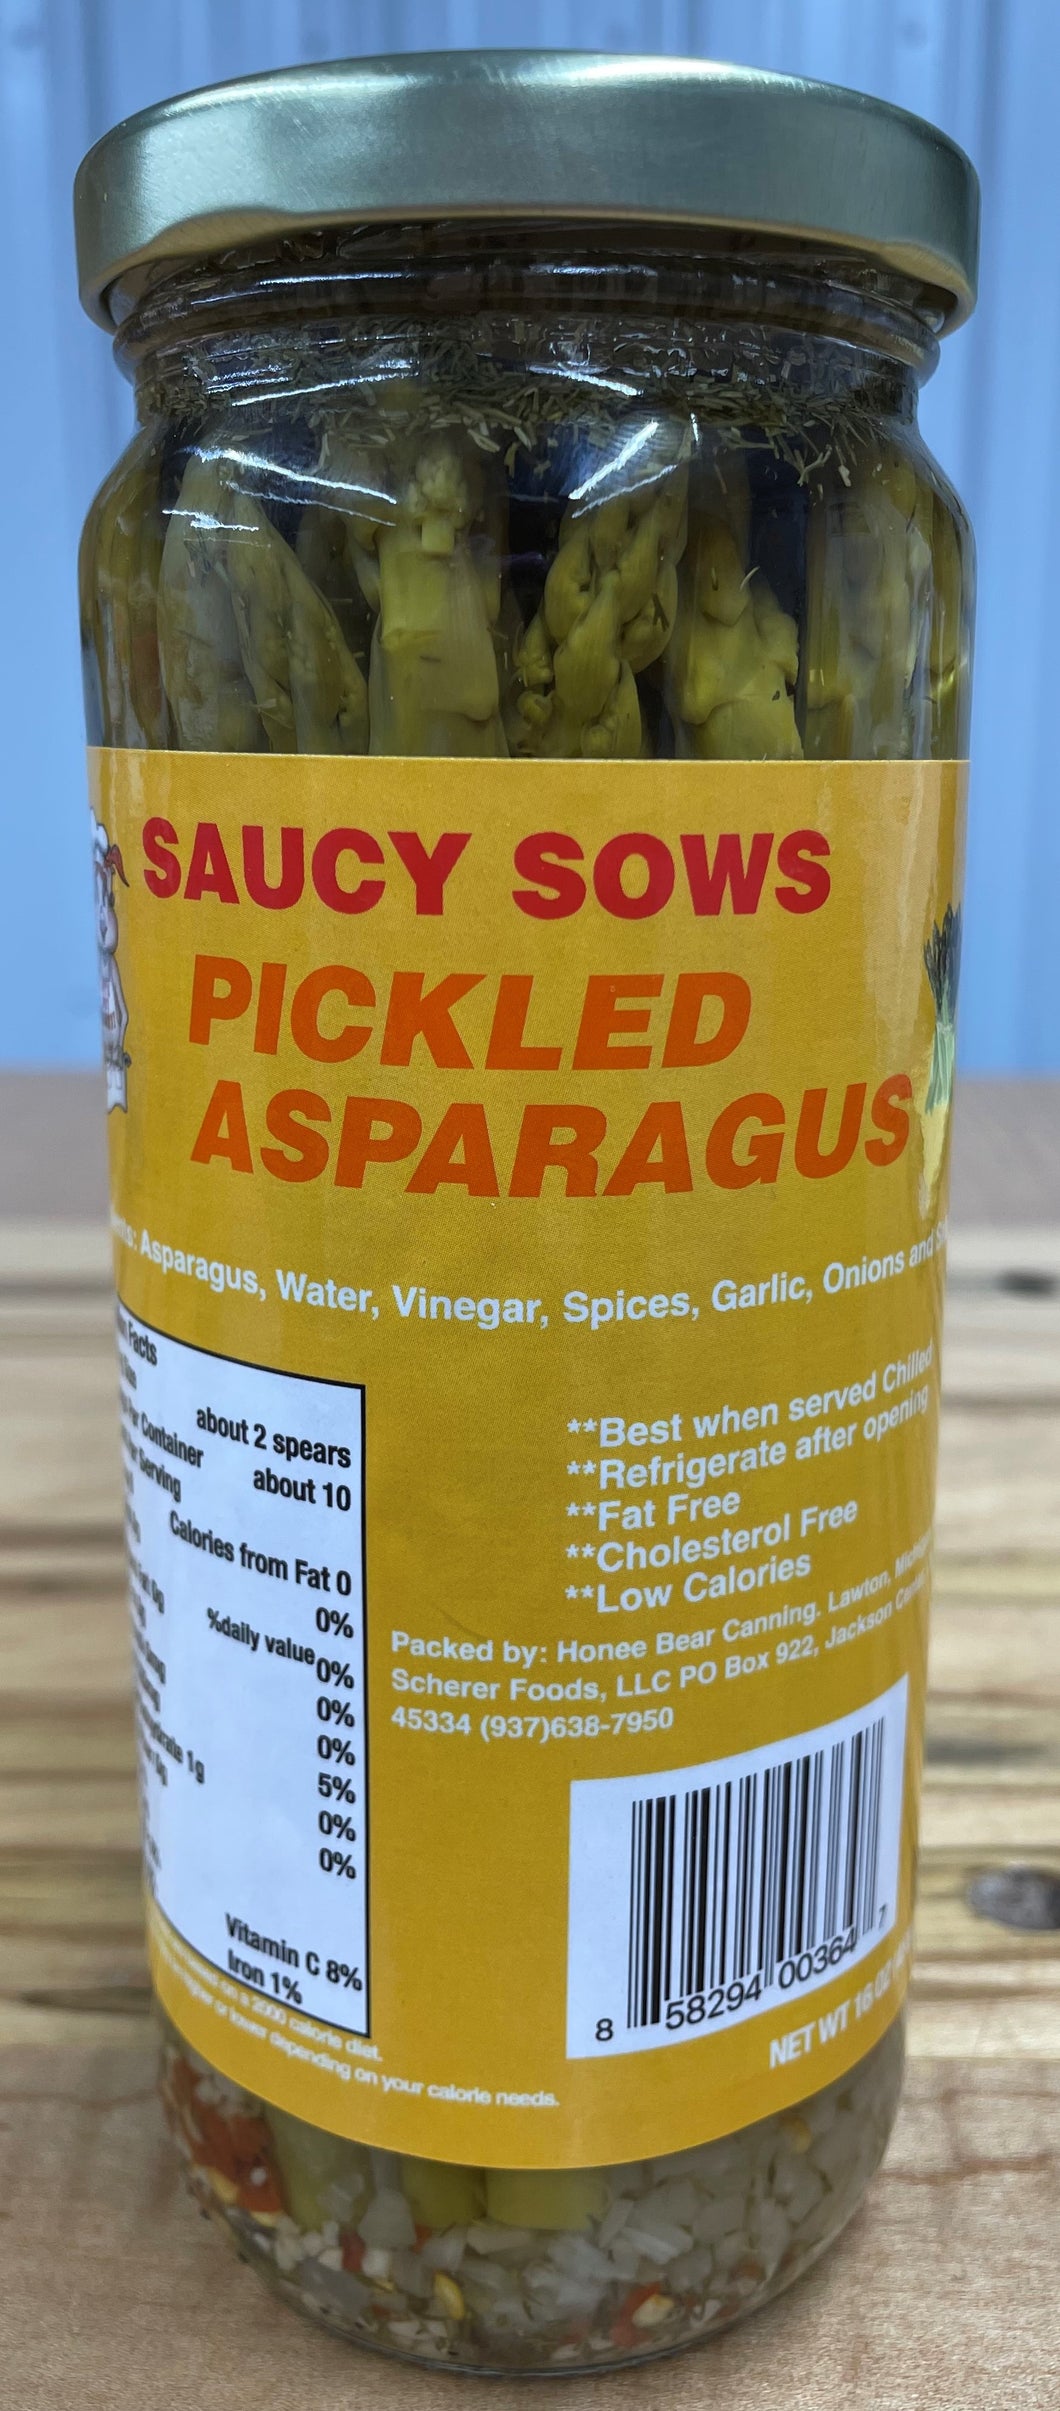 Saucy Sows Pickled Asparagus